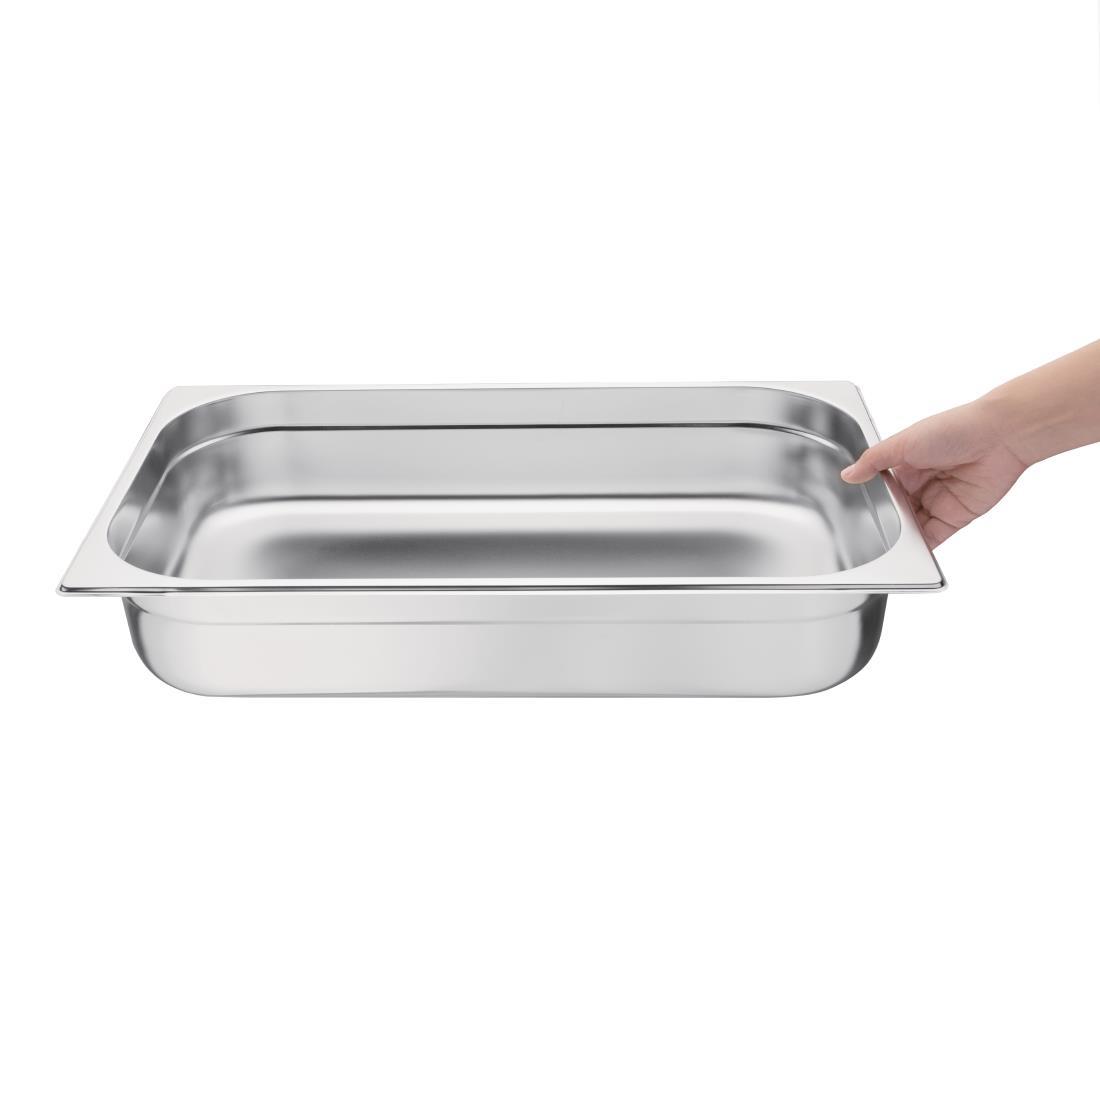 Vogue Stainless Steel 1/1 Gastronorm Pan 100mm - K923  - 6